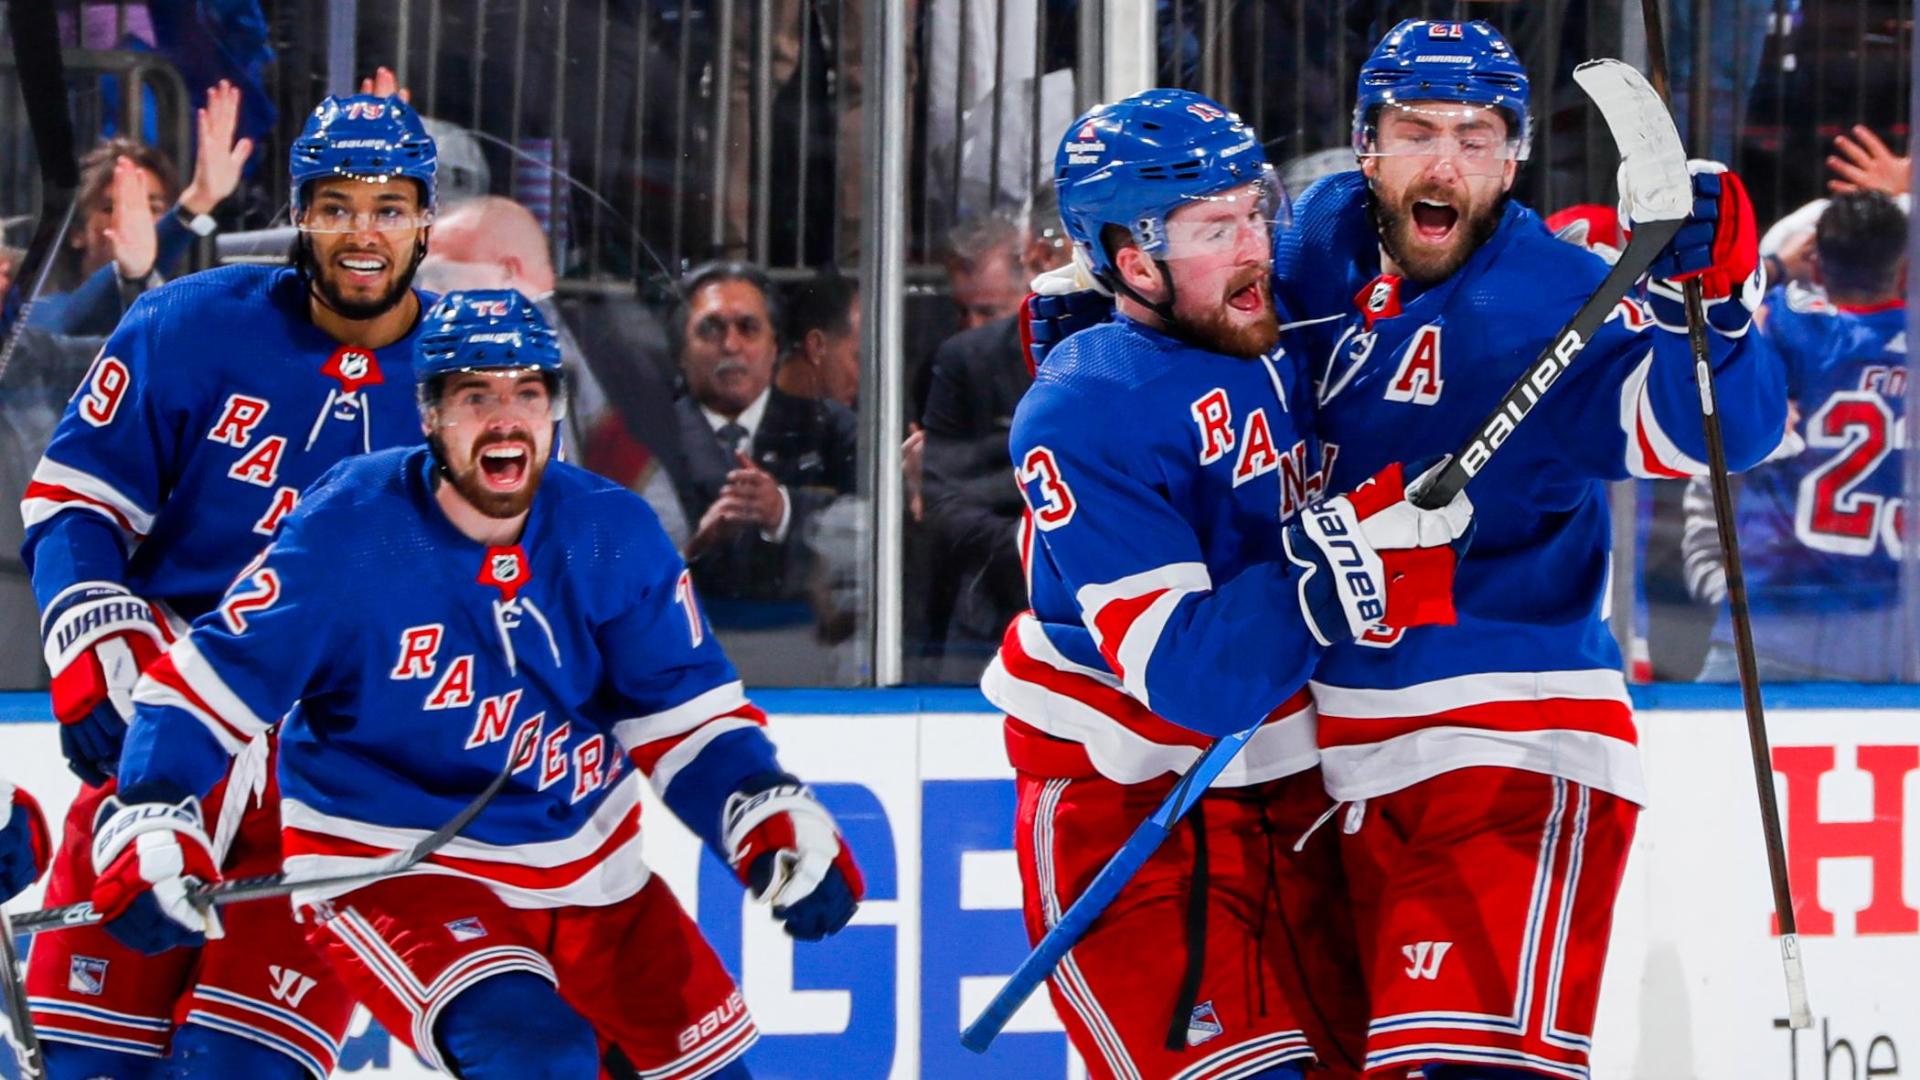 Rangers outlast Panthers in OT to level series